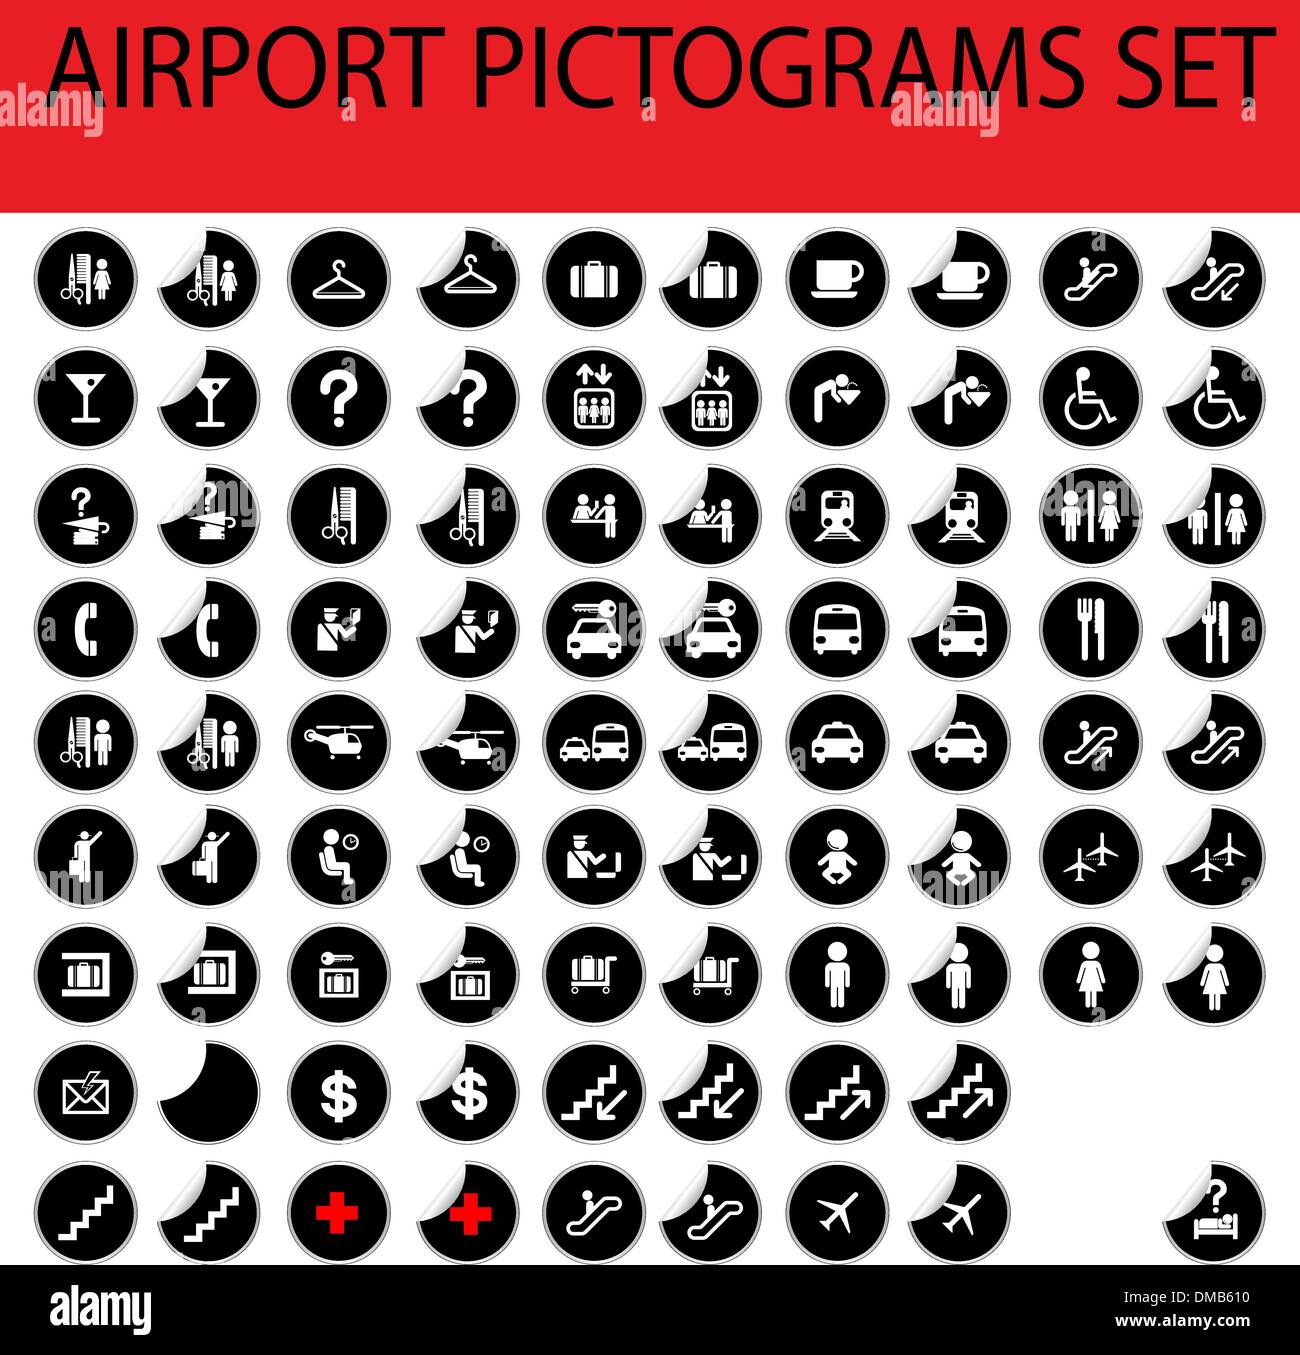 Airport pictograms set Stock Vector